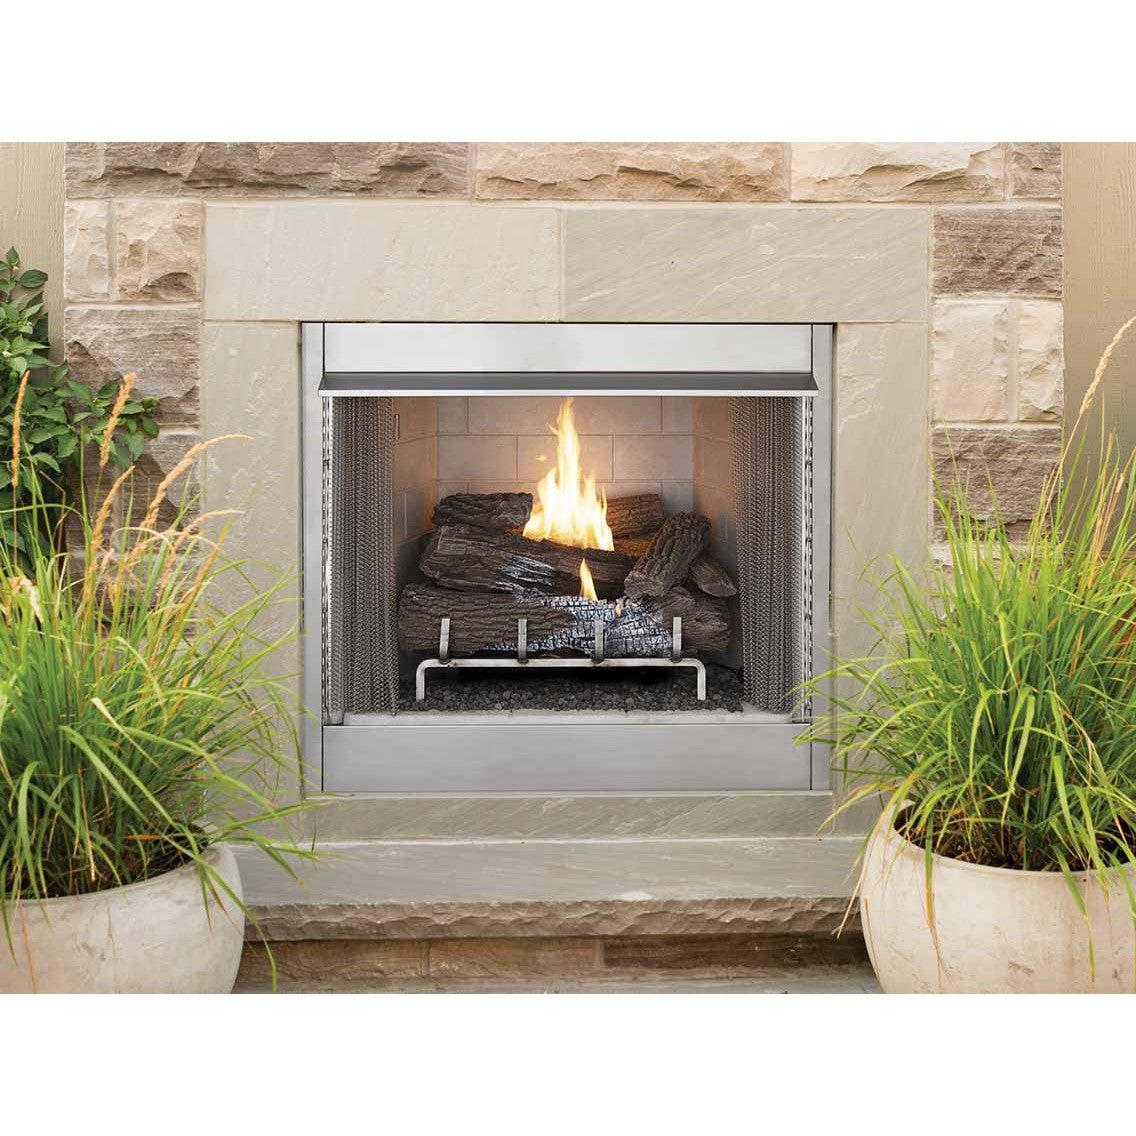 Superior VRE4242 42" Traditional Indoor/Outdoor Vent-Free Gas Fireplace With White Herringbone Refractory Panels